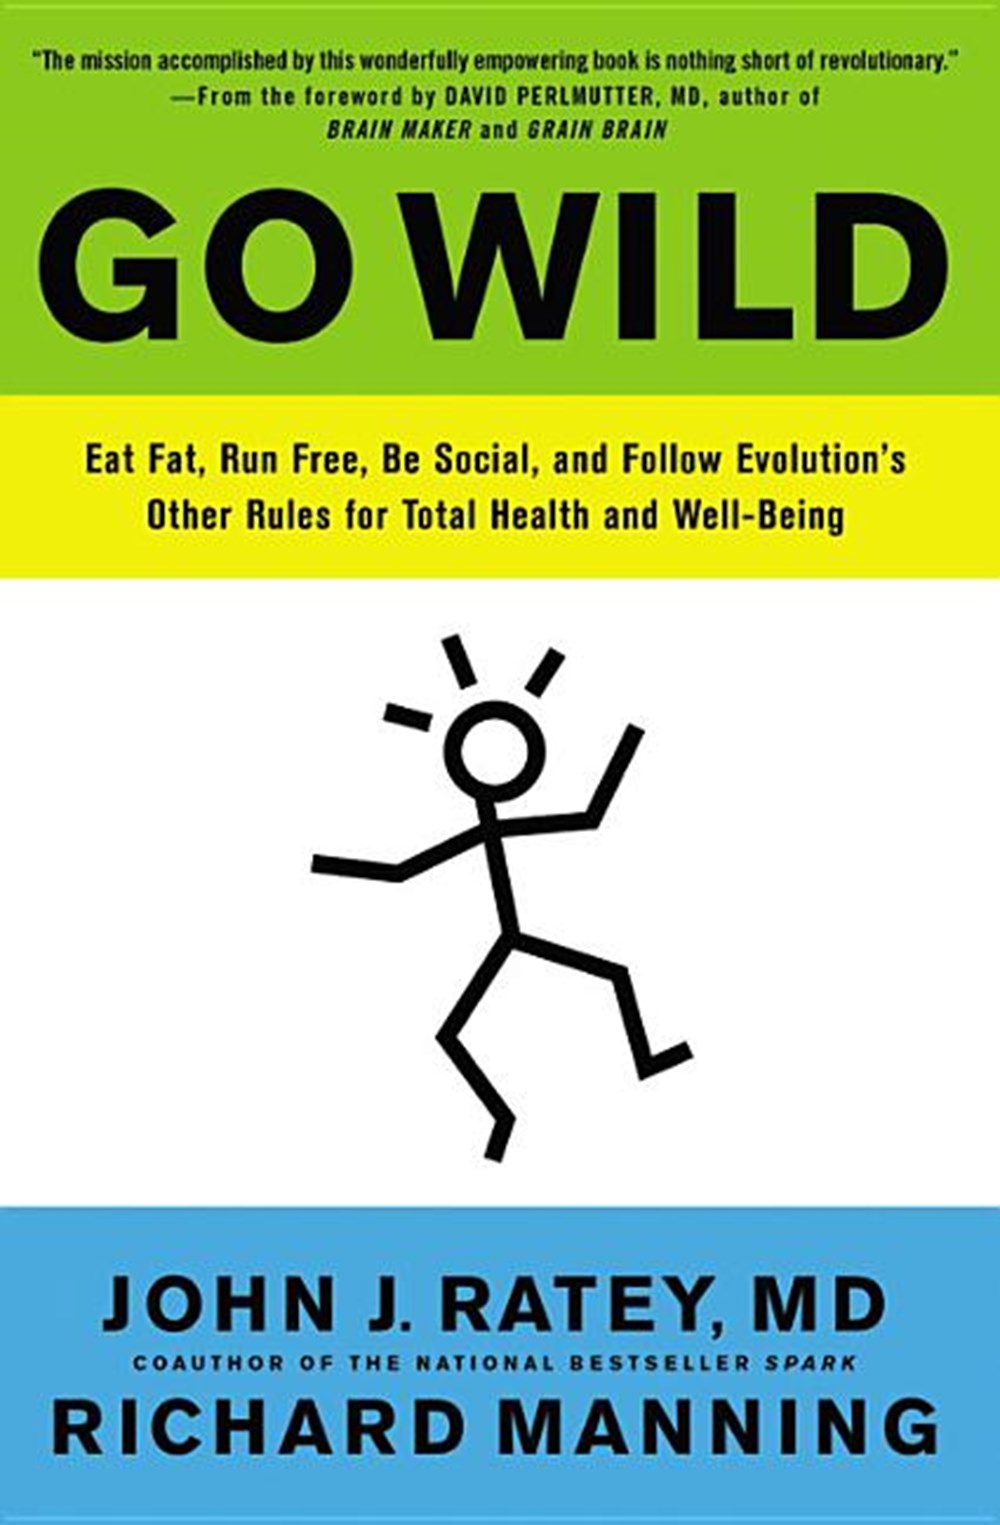 Go Wild: Eat Fat, Run Free, Be Social, and Follow Evolution's Other Rules for Total Health and Well-